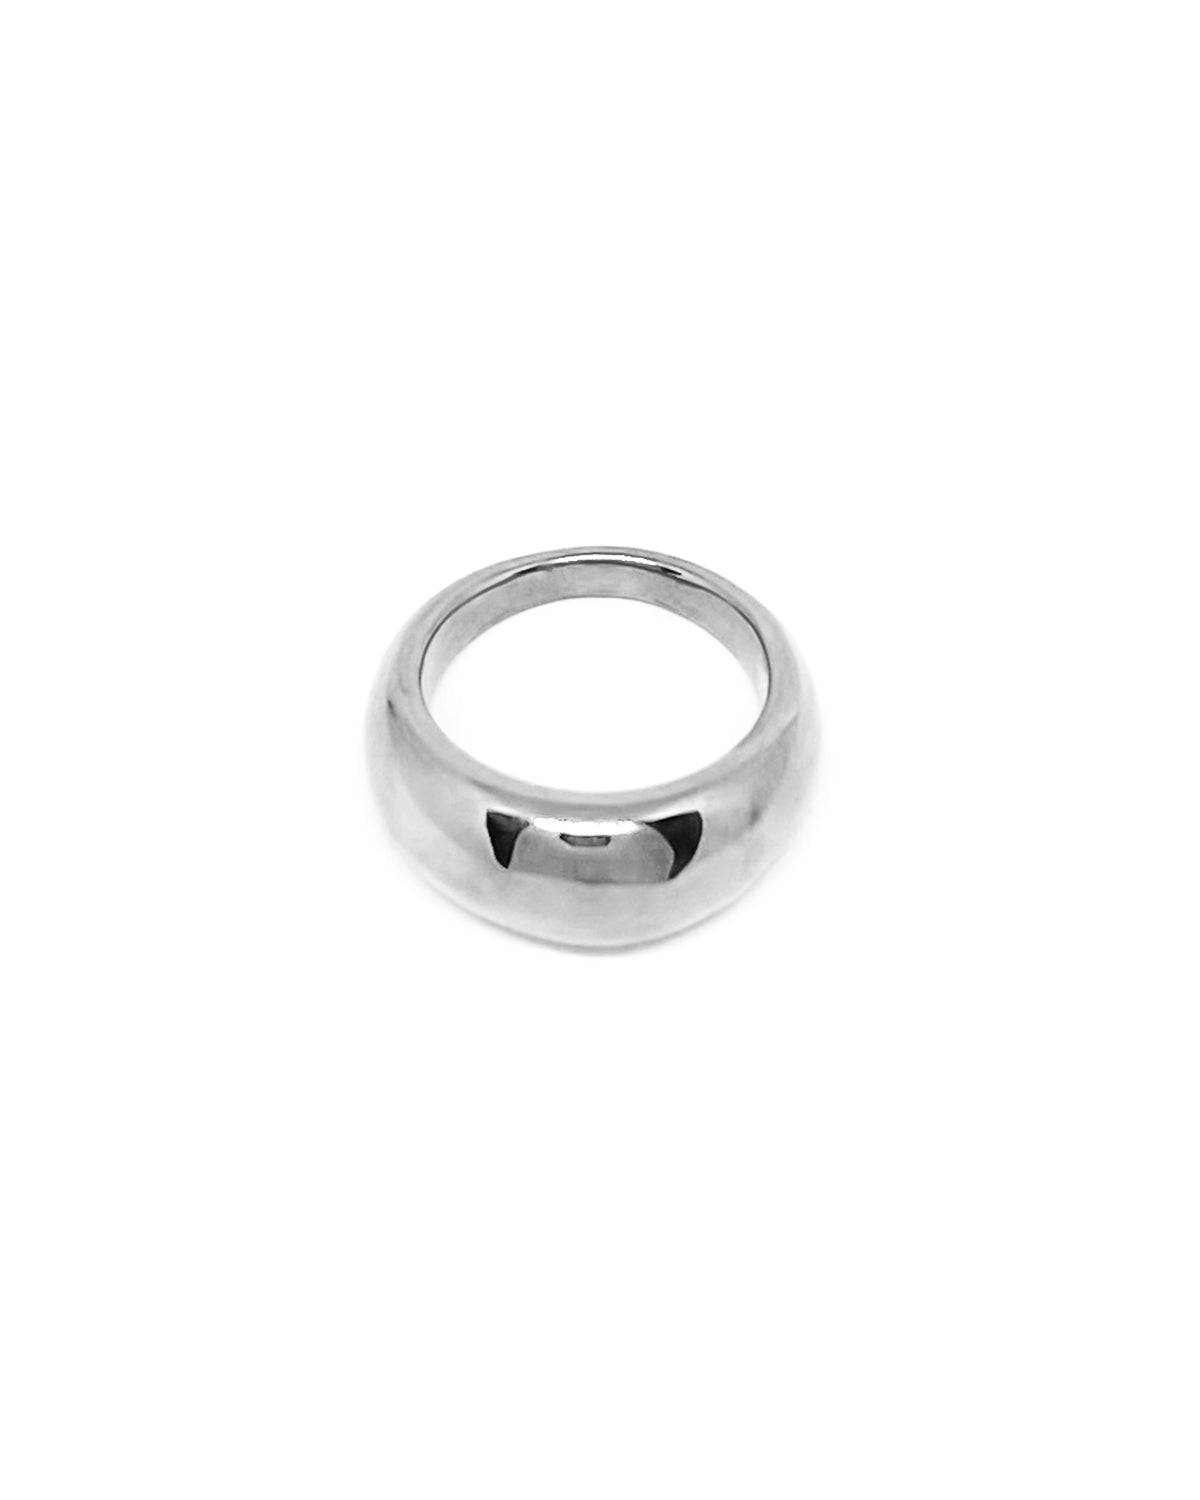 SMALL DOME RING